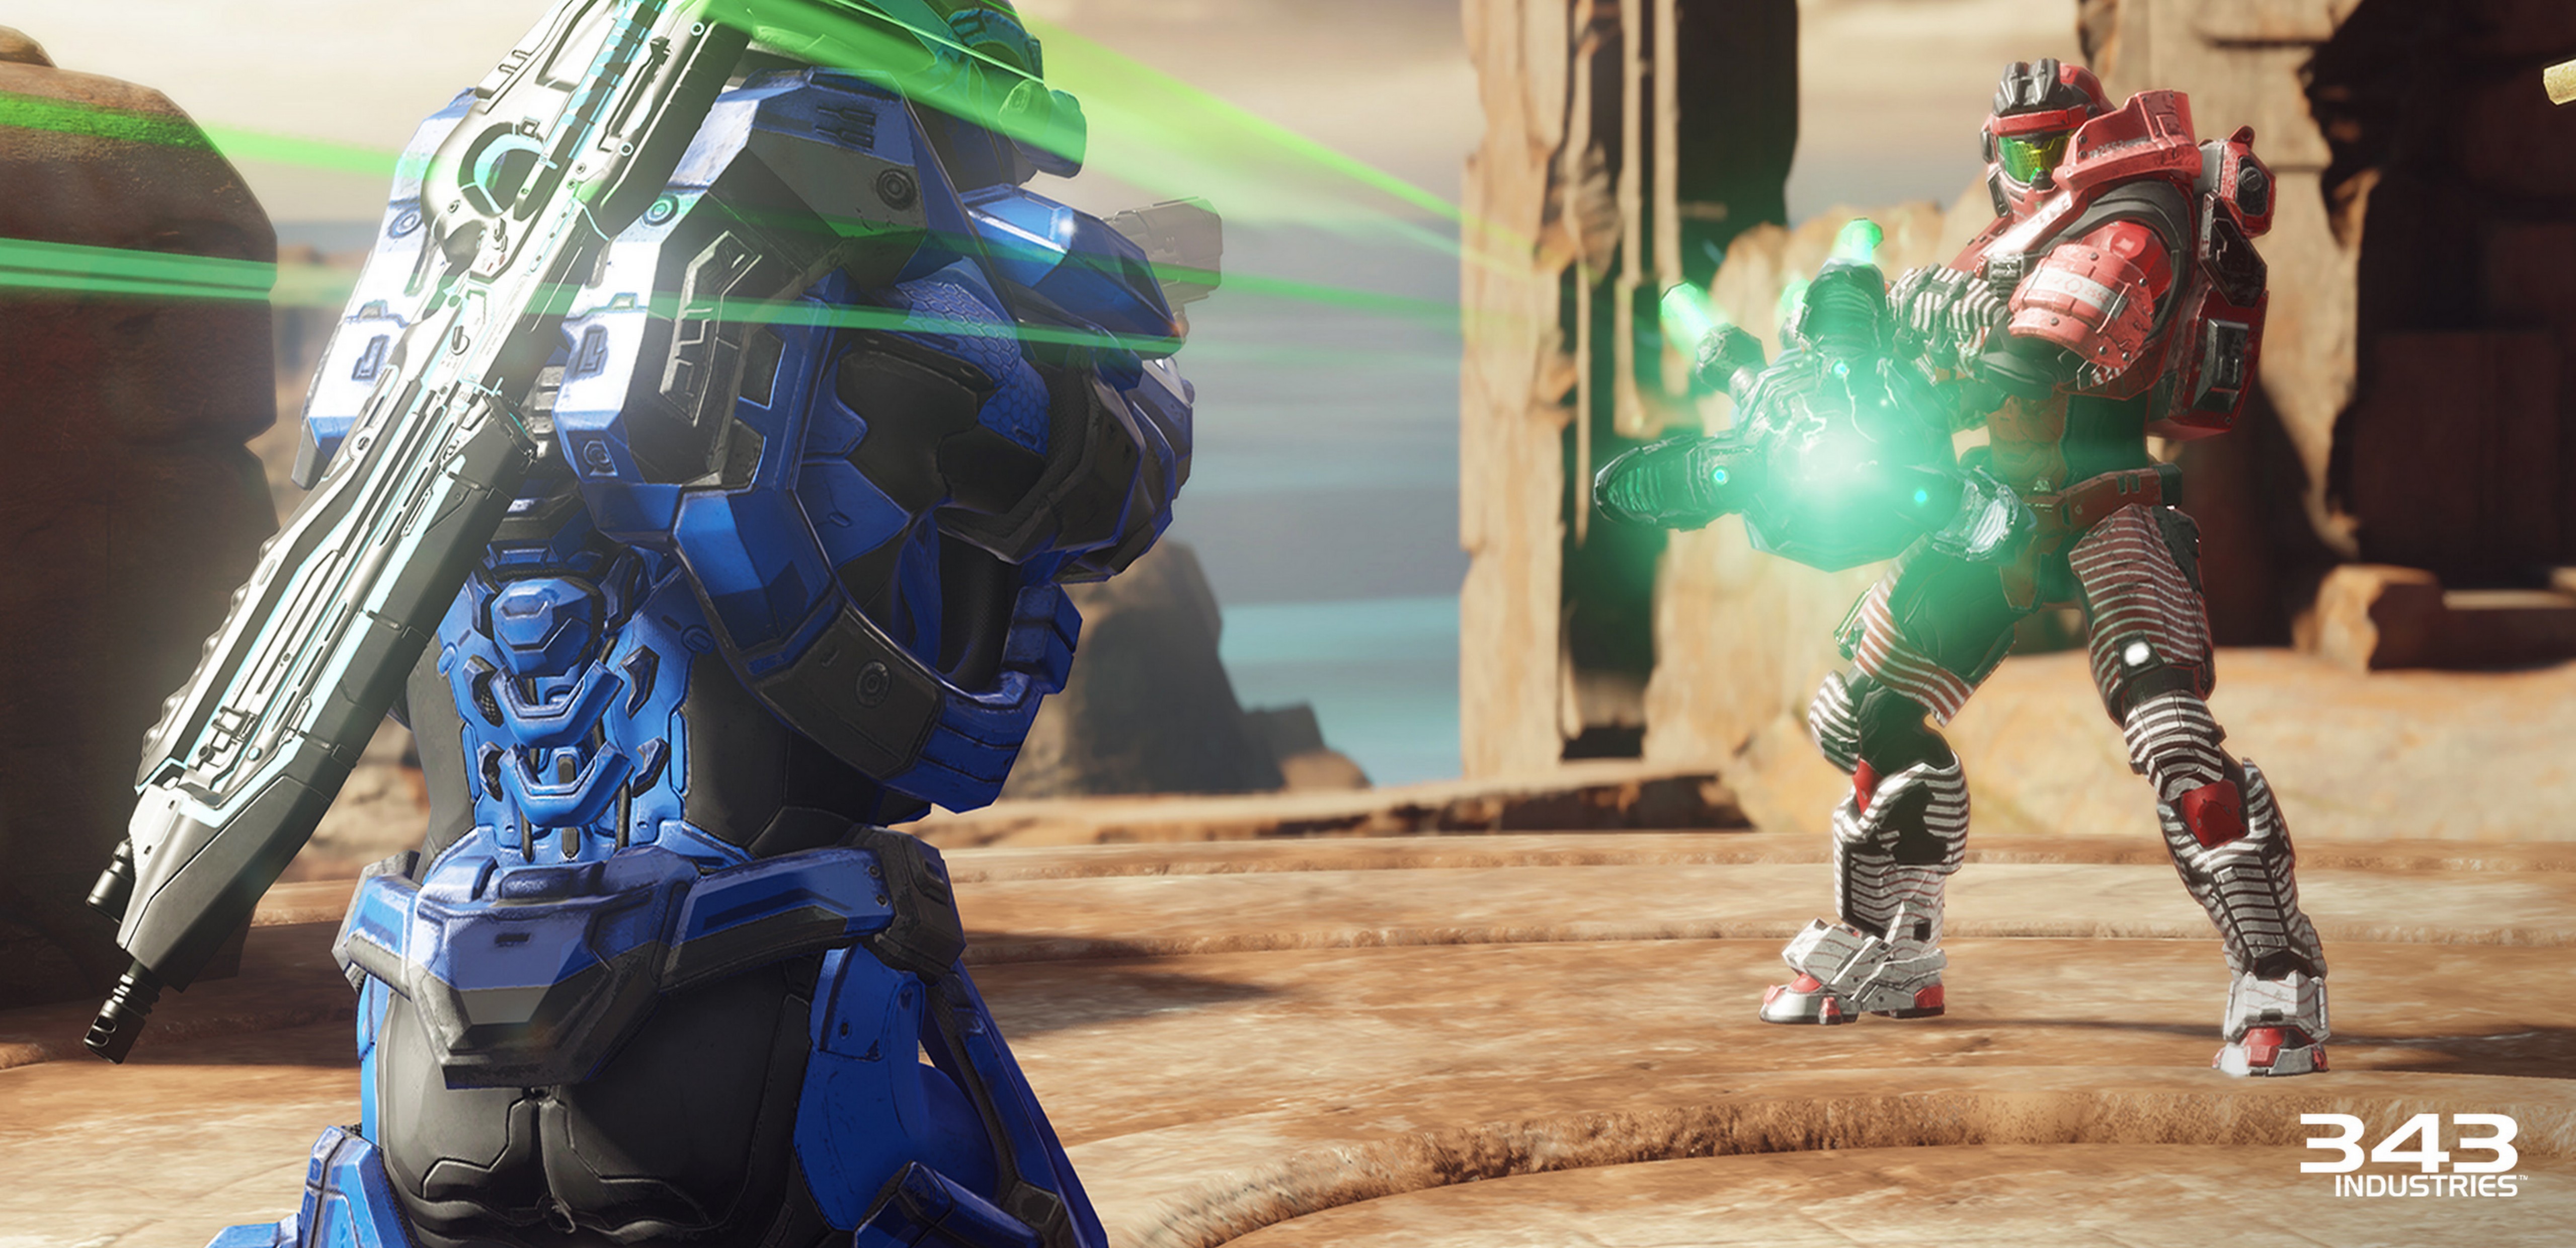 Halo 5: Forge in the Windows Store